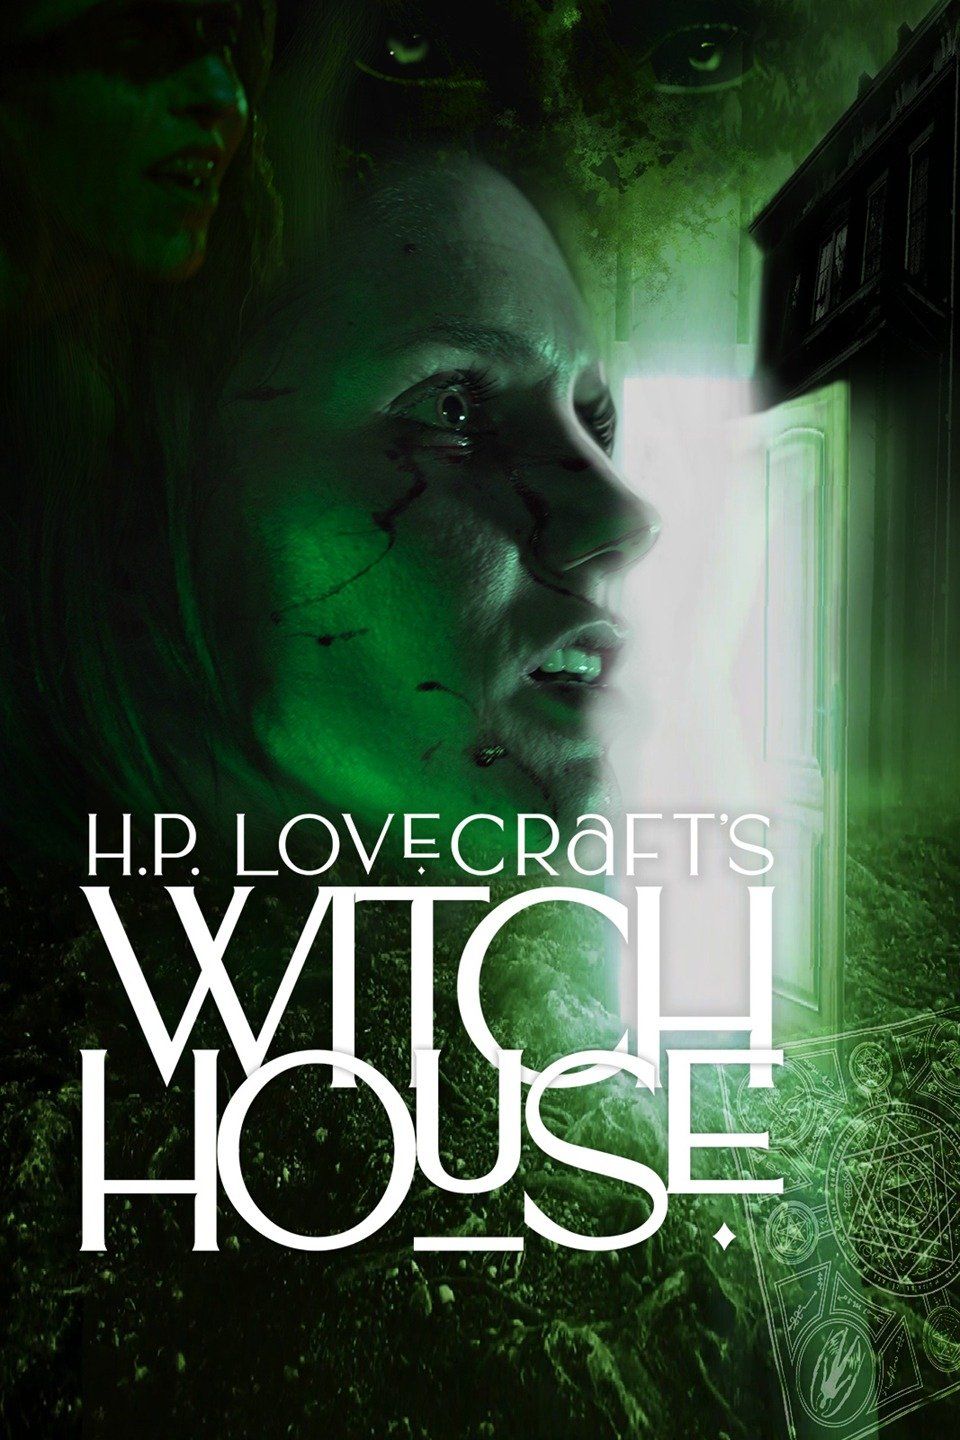 Watch H.P. Lovecraft's Witch House (2022) Full Movie Free Online